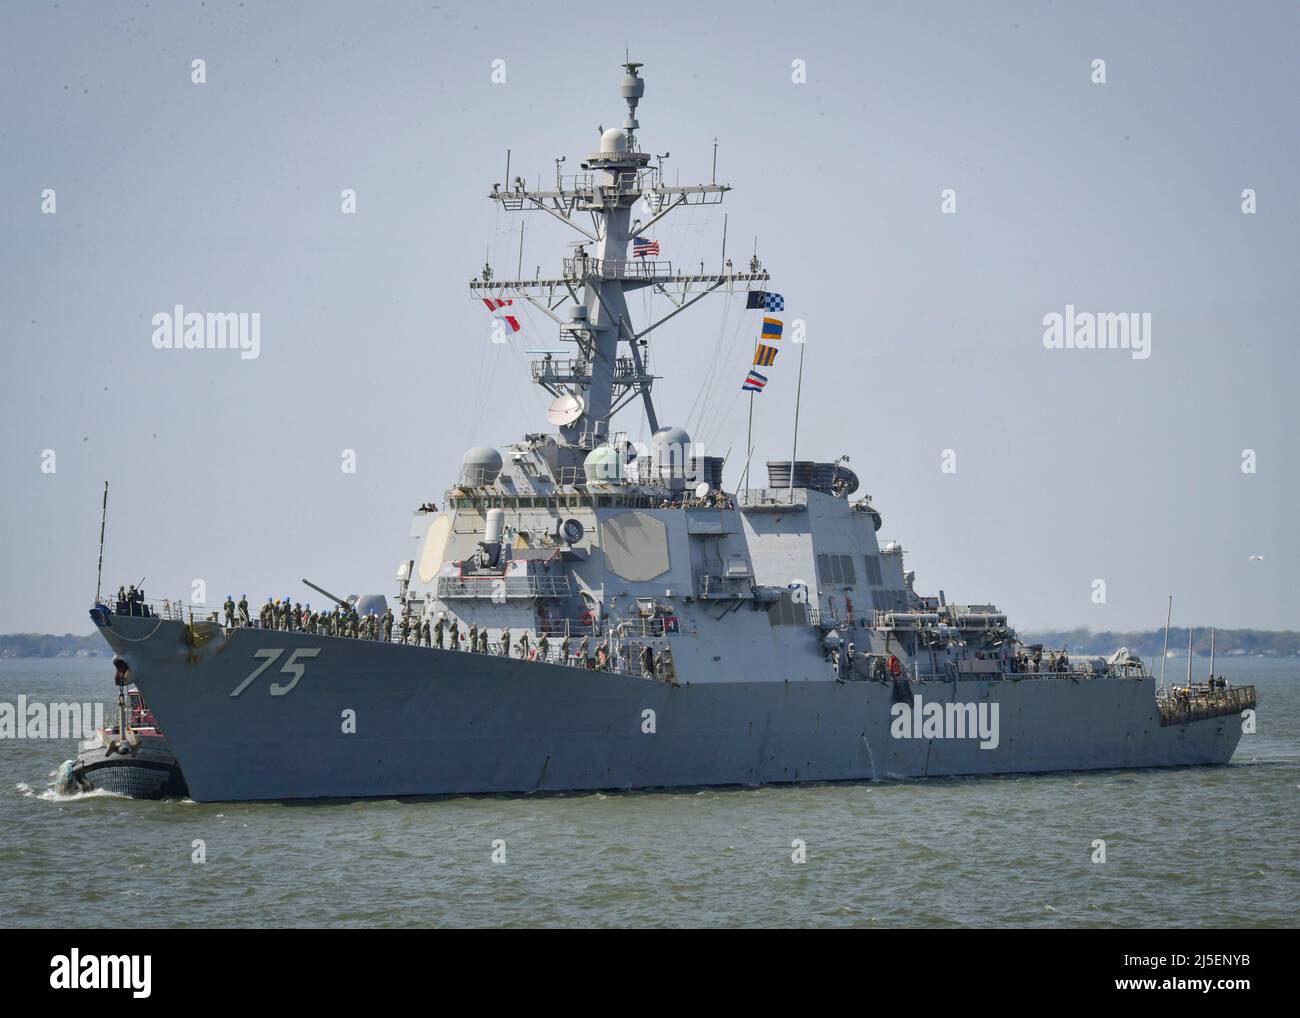 Norfork, United States. 14 April, 2022. The U.S. Navy Arleigh-Burke class guided-missile destroyer USS Donald Cook approaches homeport at Naval Station Norfolk, following a routine deployment April 14, 2022 in the Atlantic Ocean off Virginia.  Credit: MC1 Jacob Milham/Planetpix/Alamy Live News Stock Photo